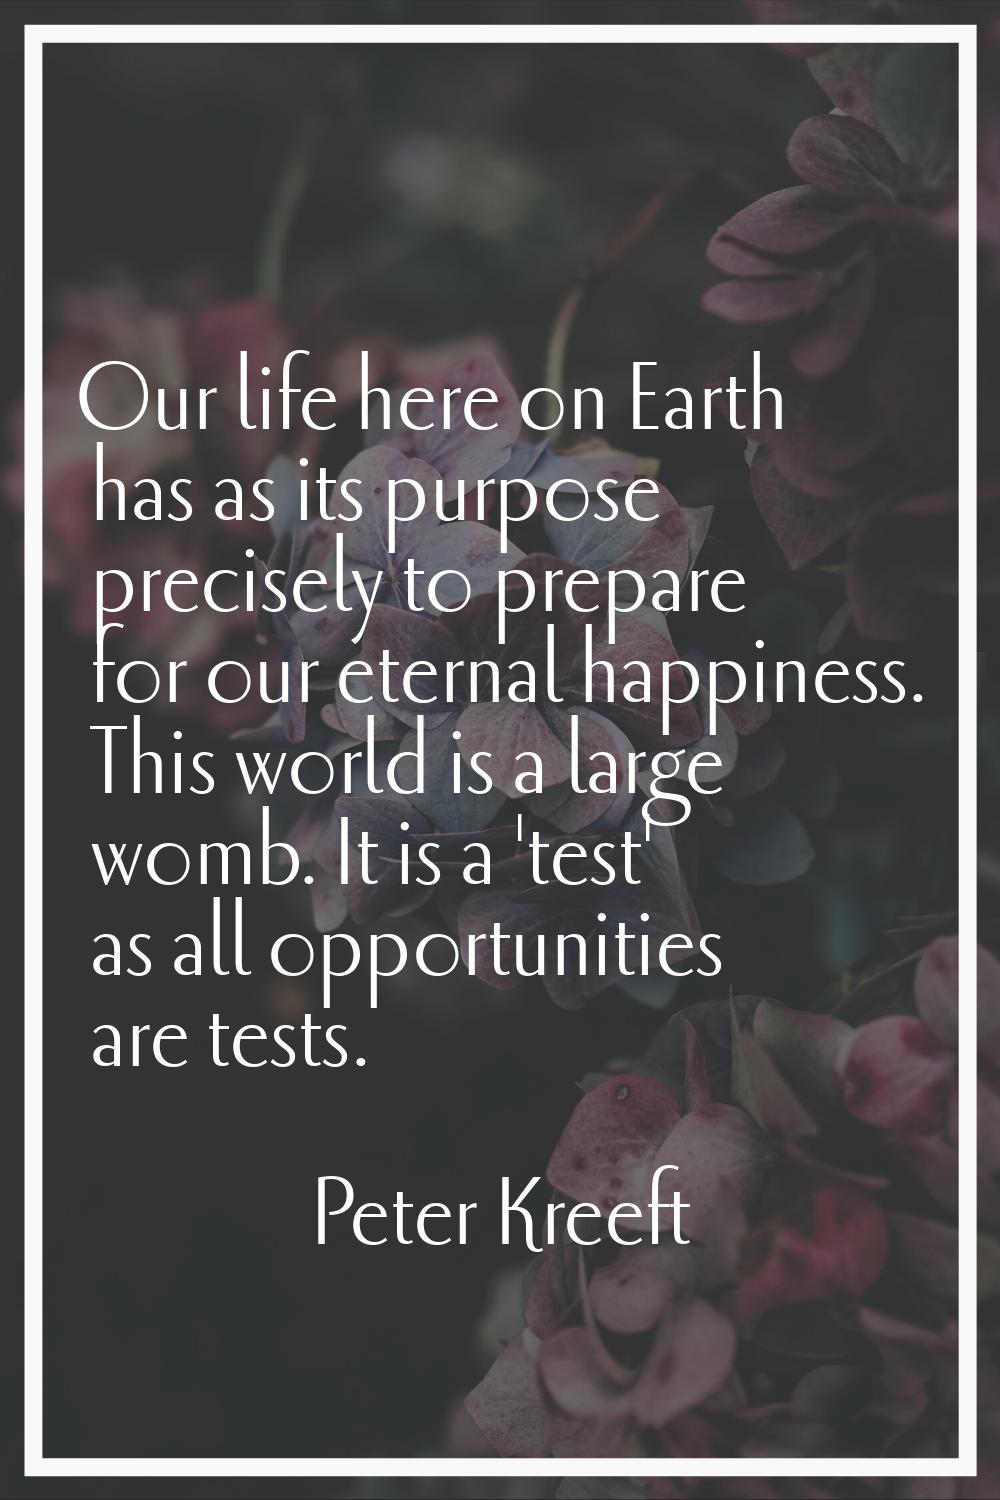 Our life here on Earth has as its purpose precisely to prepare for our eternal happiness. This worl